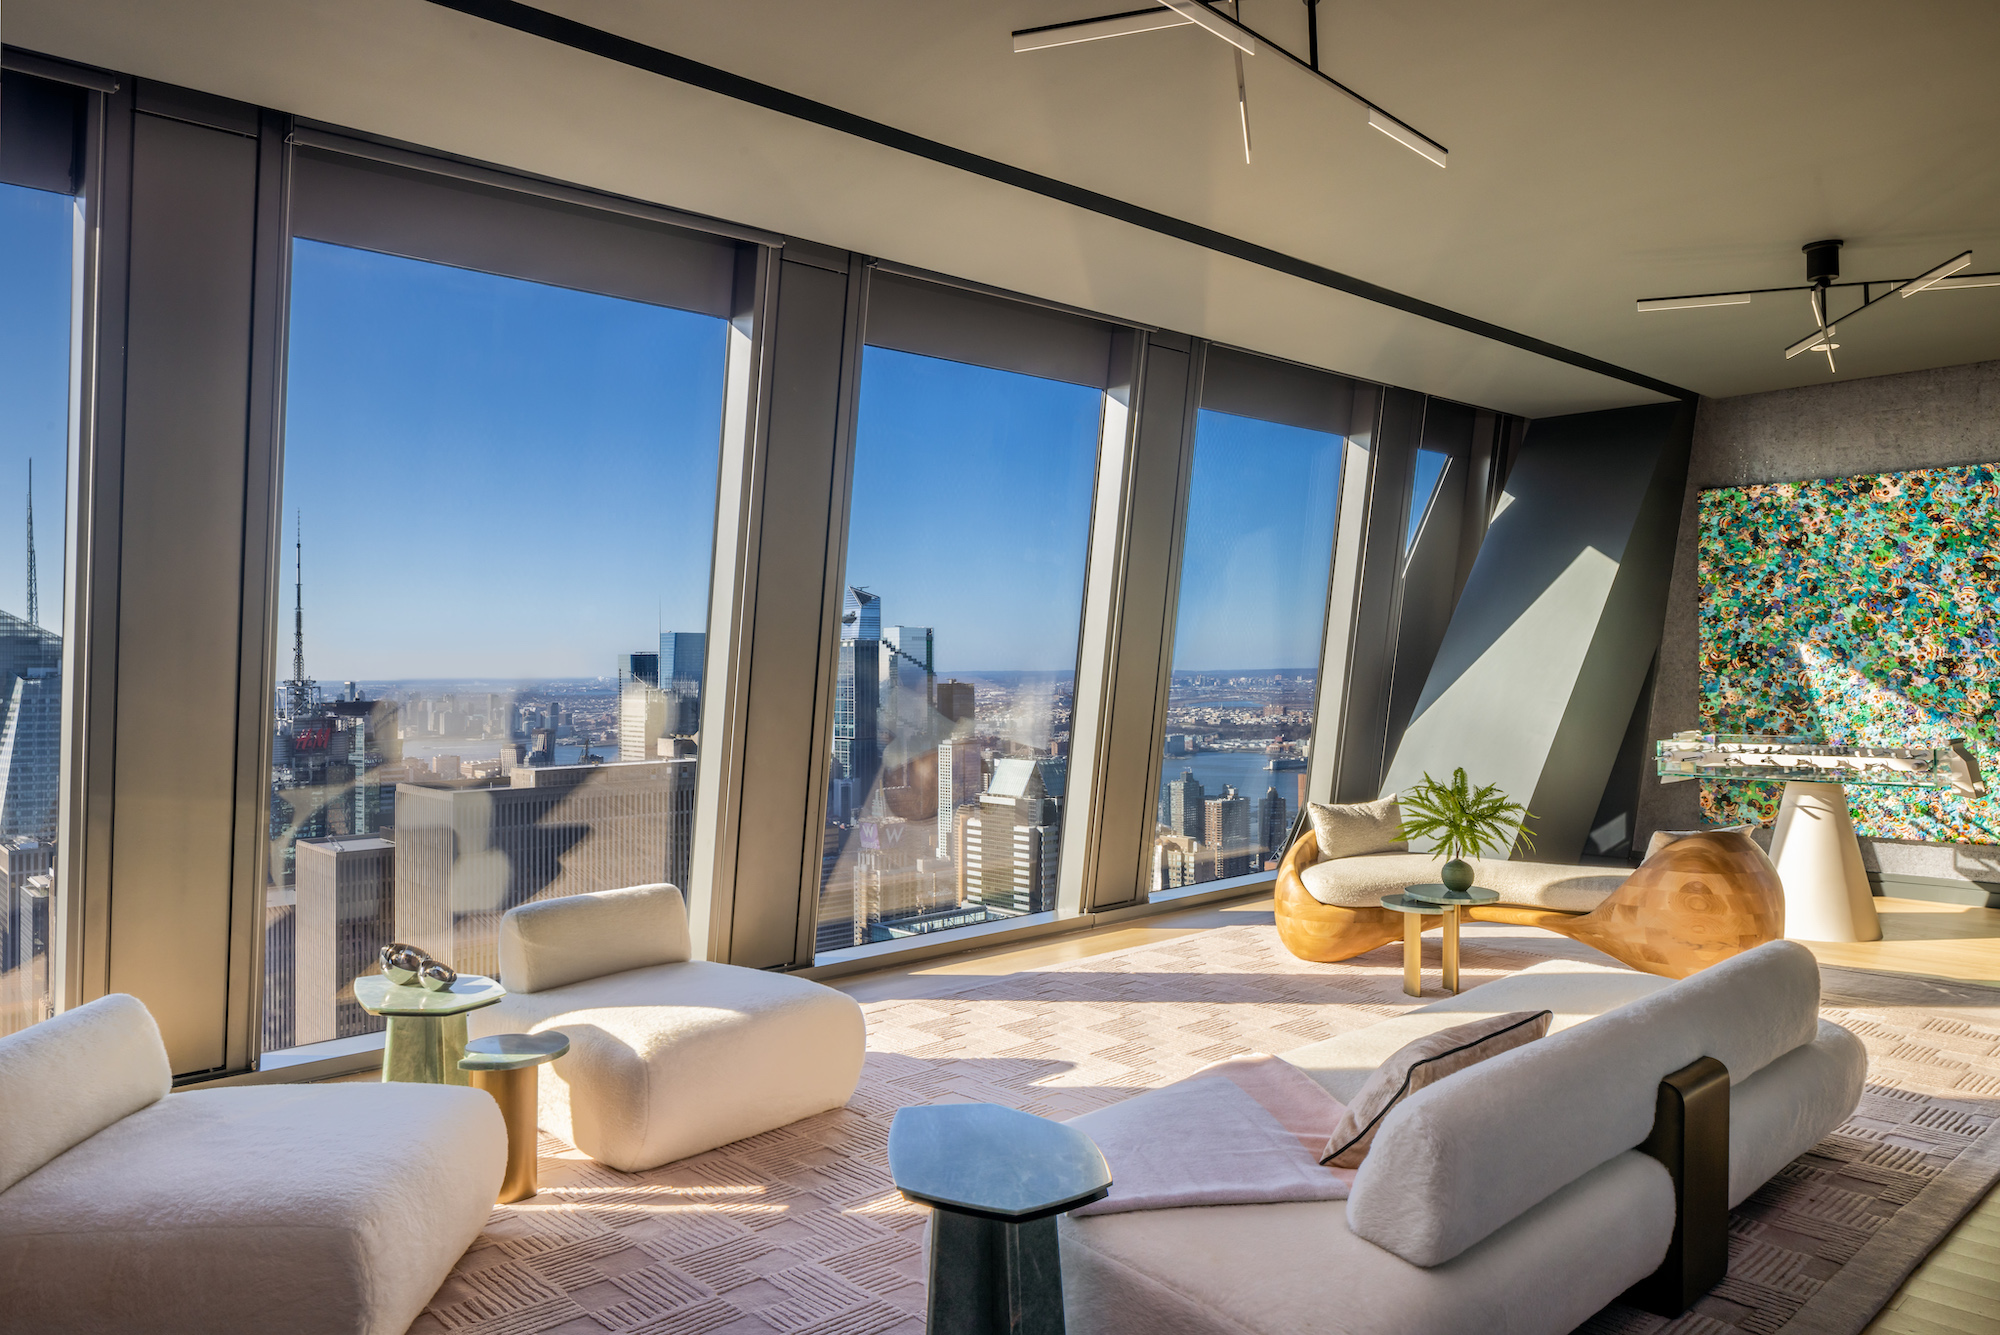 Take a tour of a duplex penthouse at Jean Nouvel's tower above 